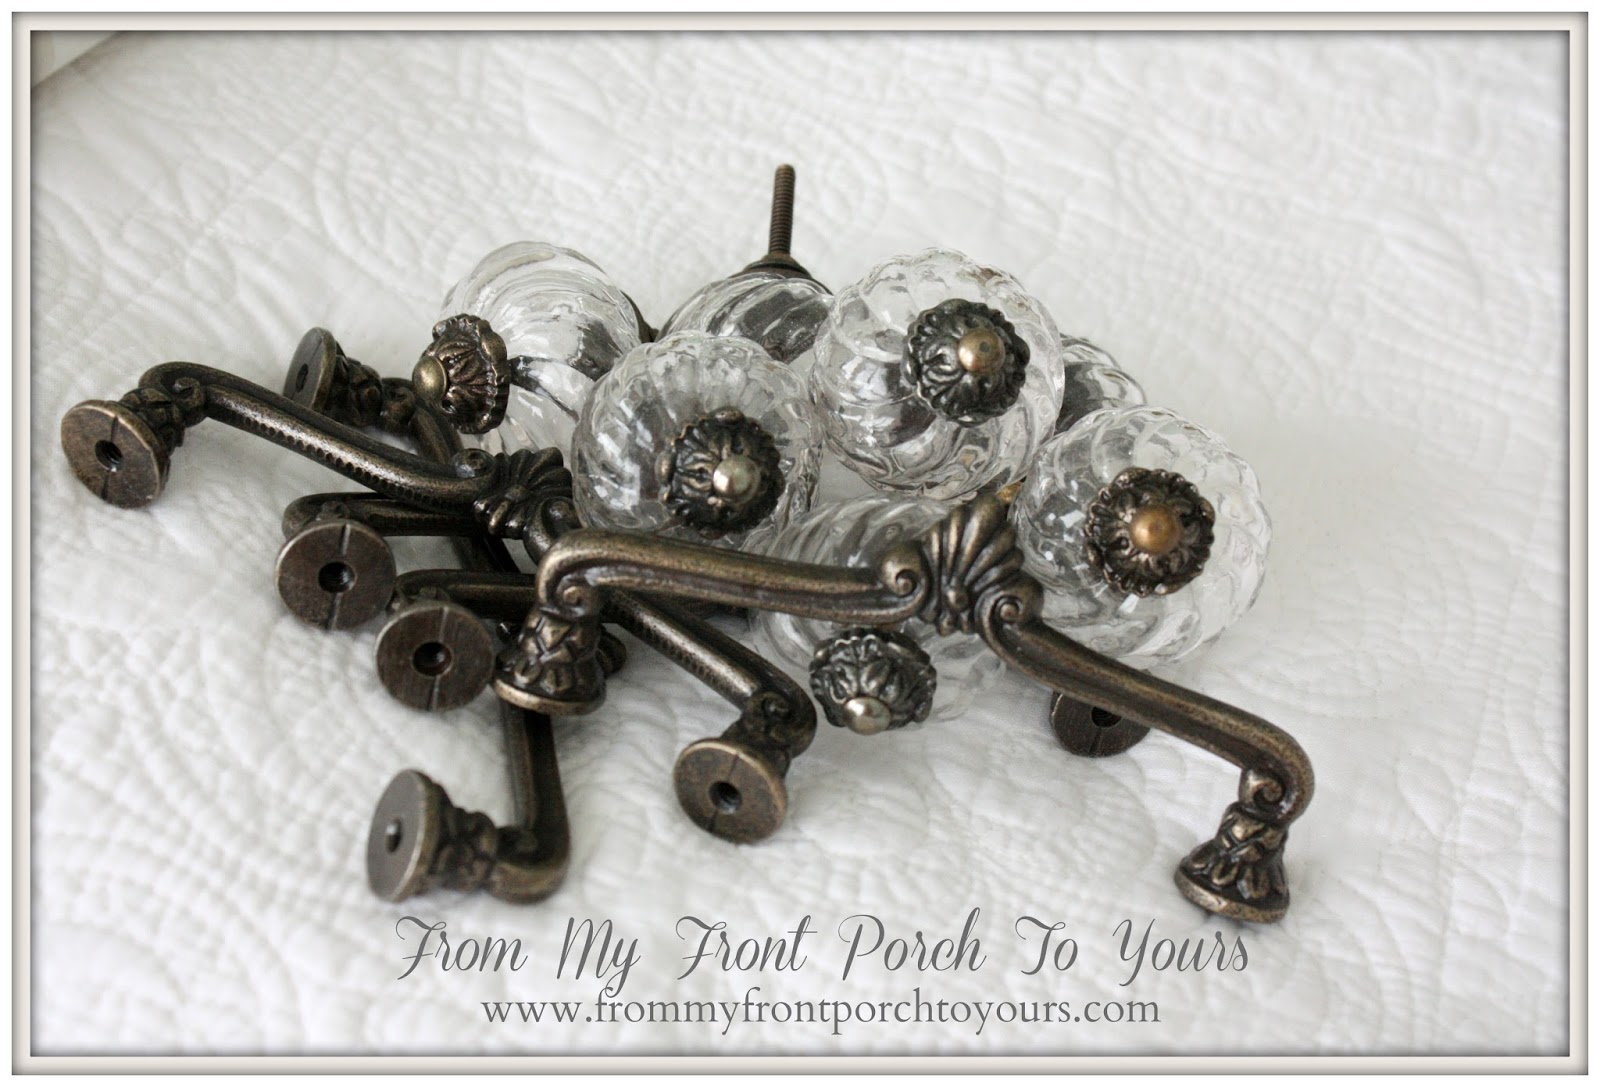 From My Front Porch To Yours- Inexpensive Details- Hobby Lobby Glass Knobs